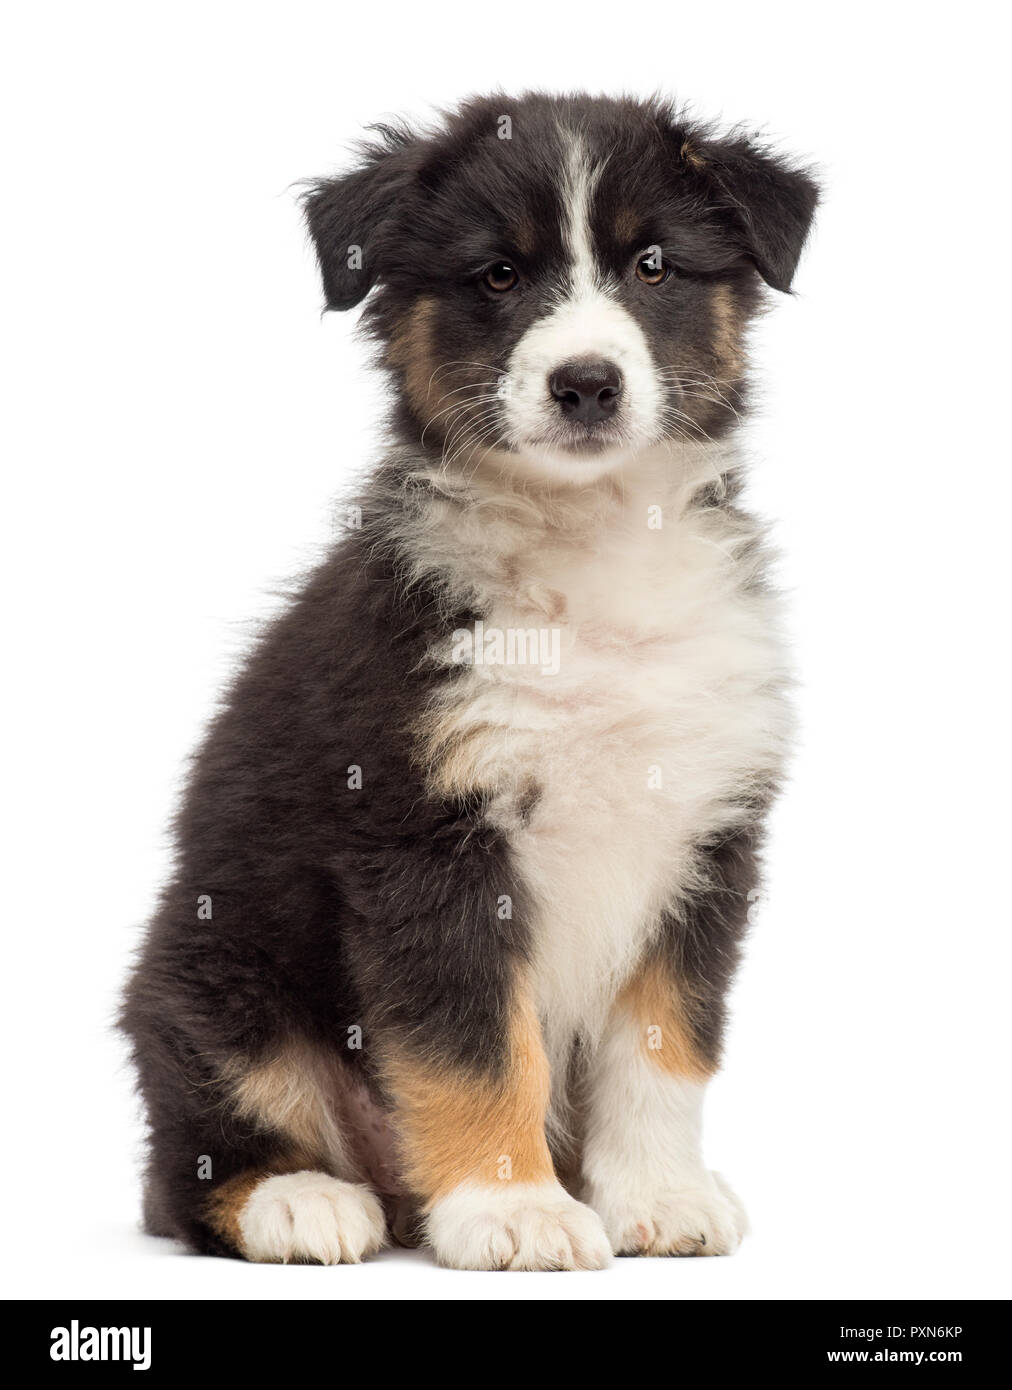 Australian Shepherd puppy, 8 weeks old, sitting and portrait against white background Stock Photo